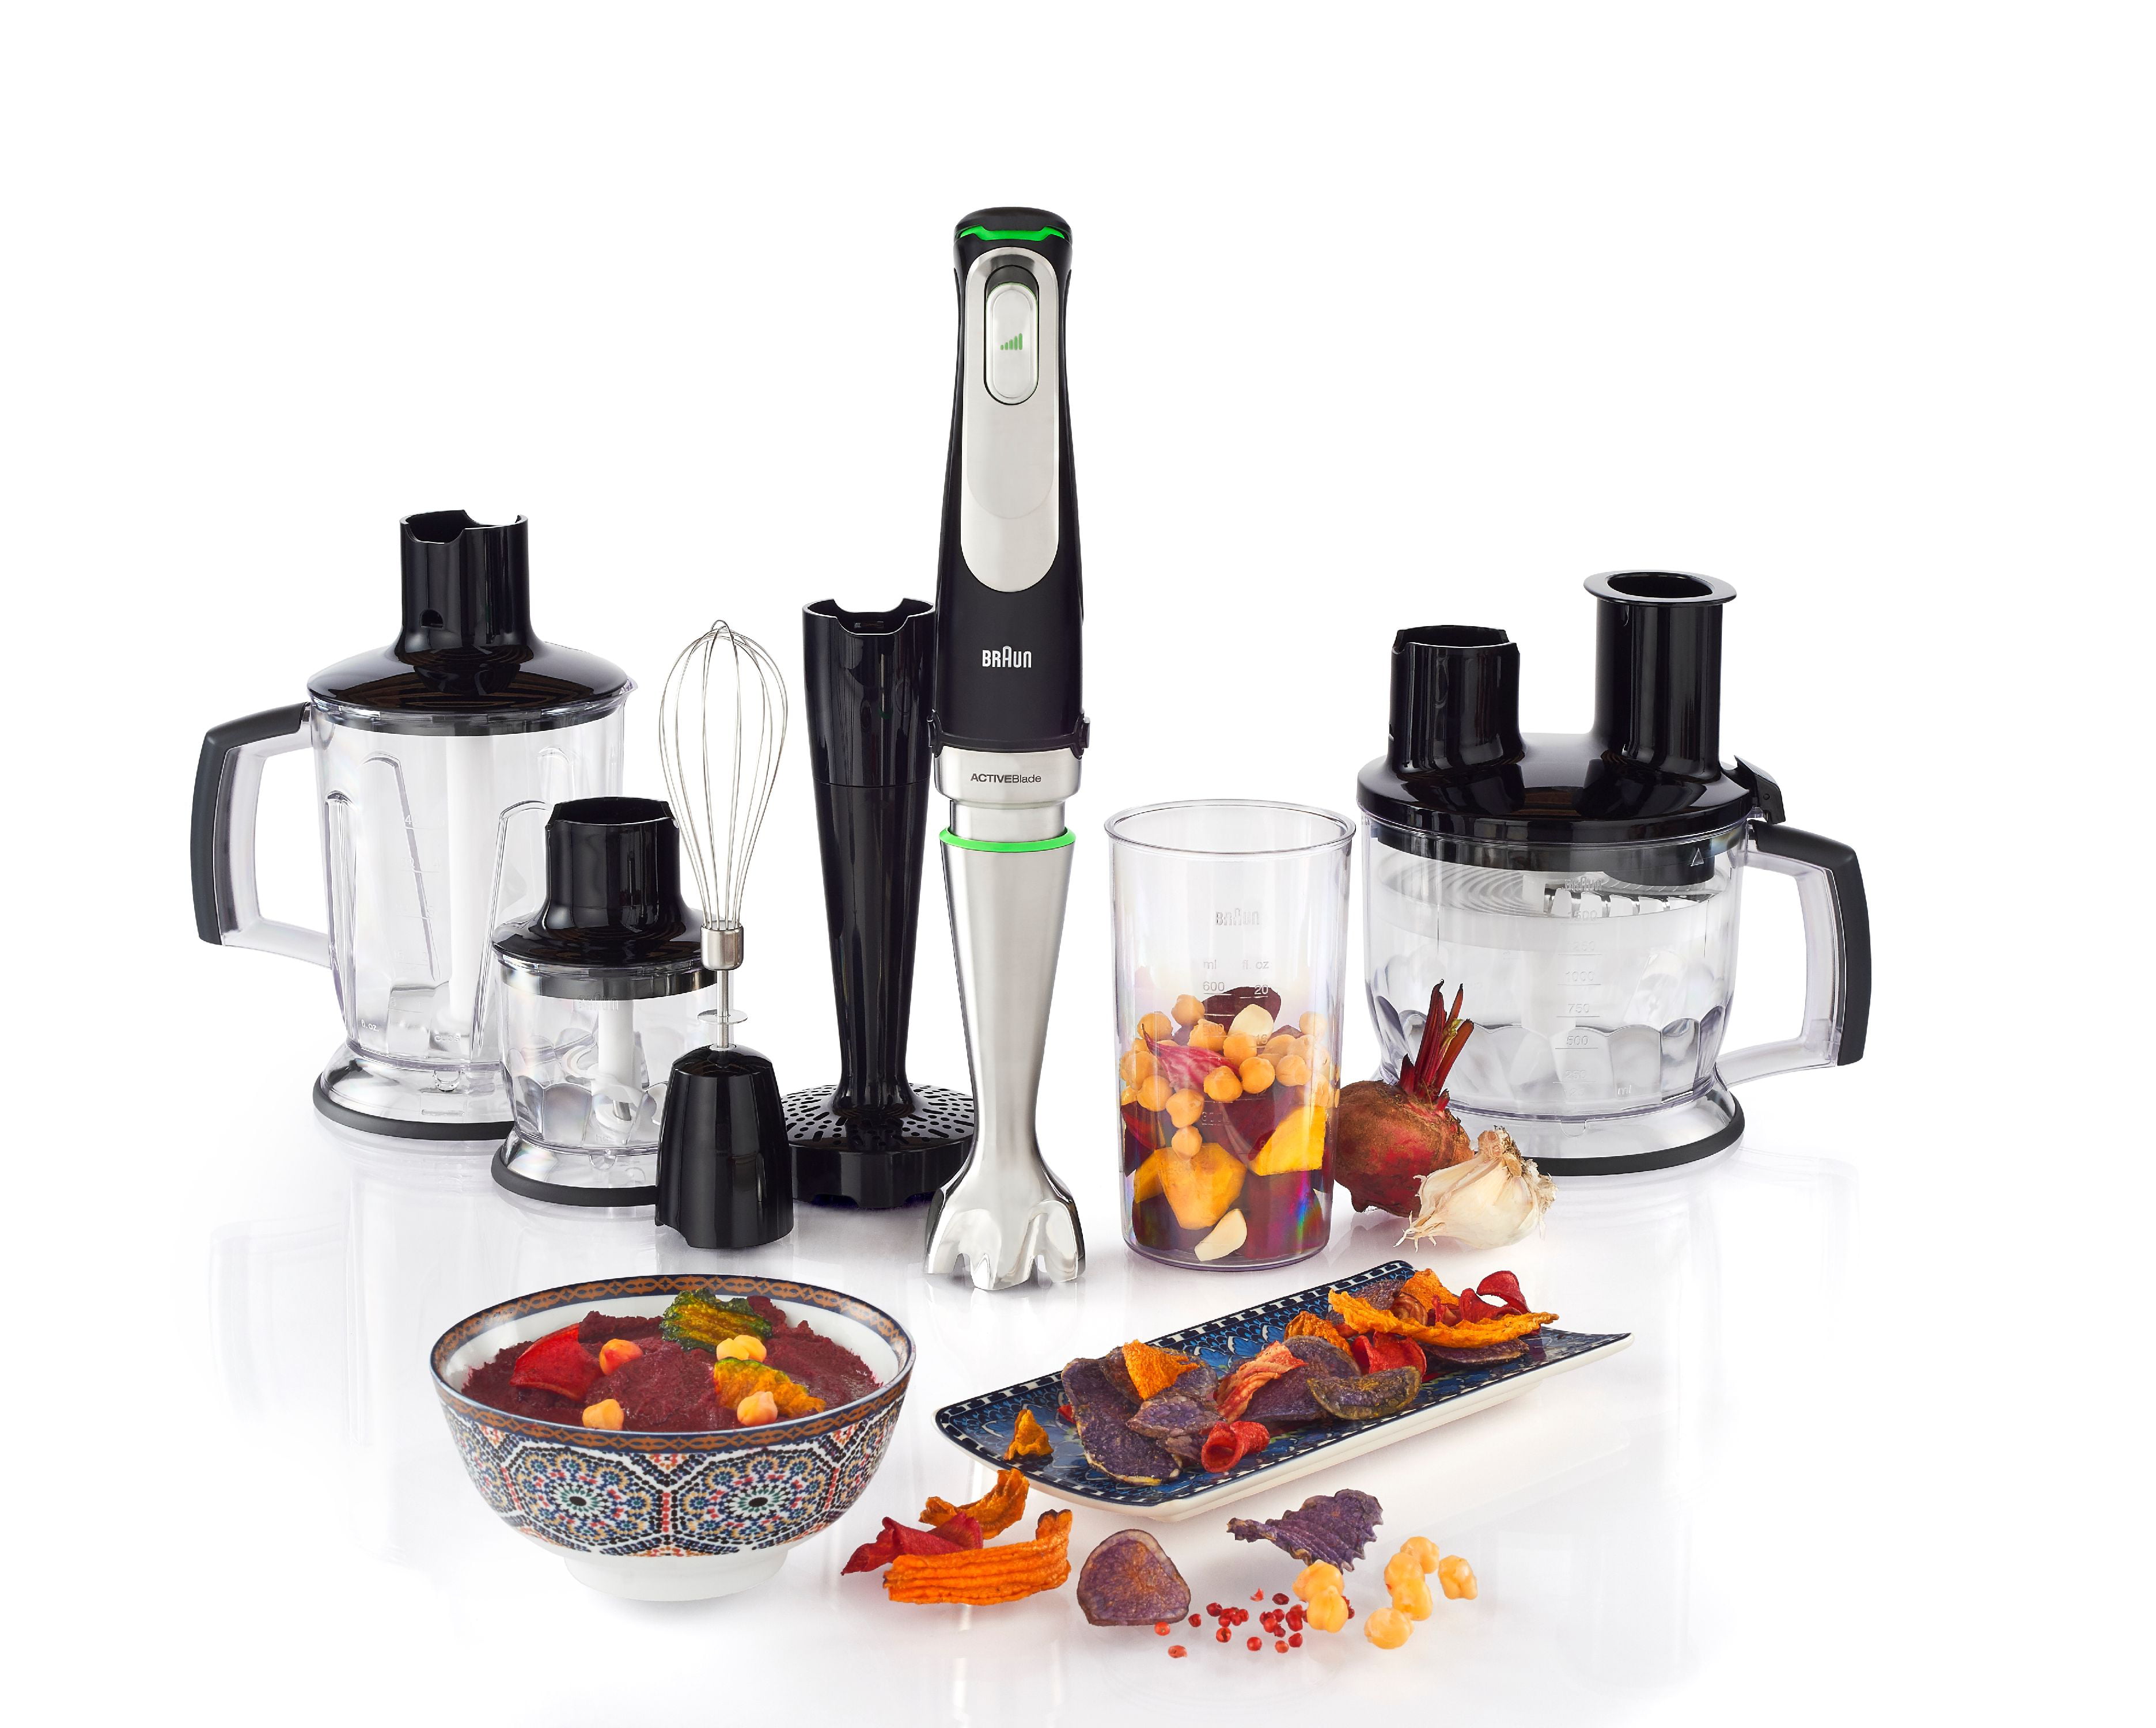 Braun Multiquick 9 with Active Blade Technology and Food Processor Attachment - Walmart.com